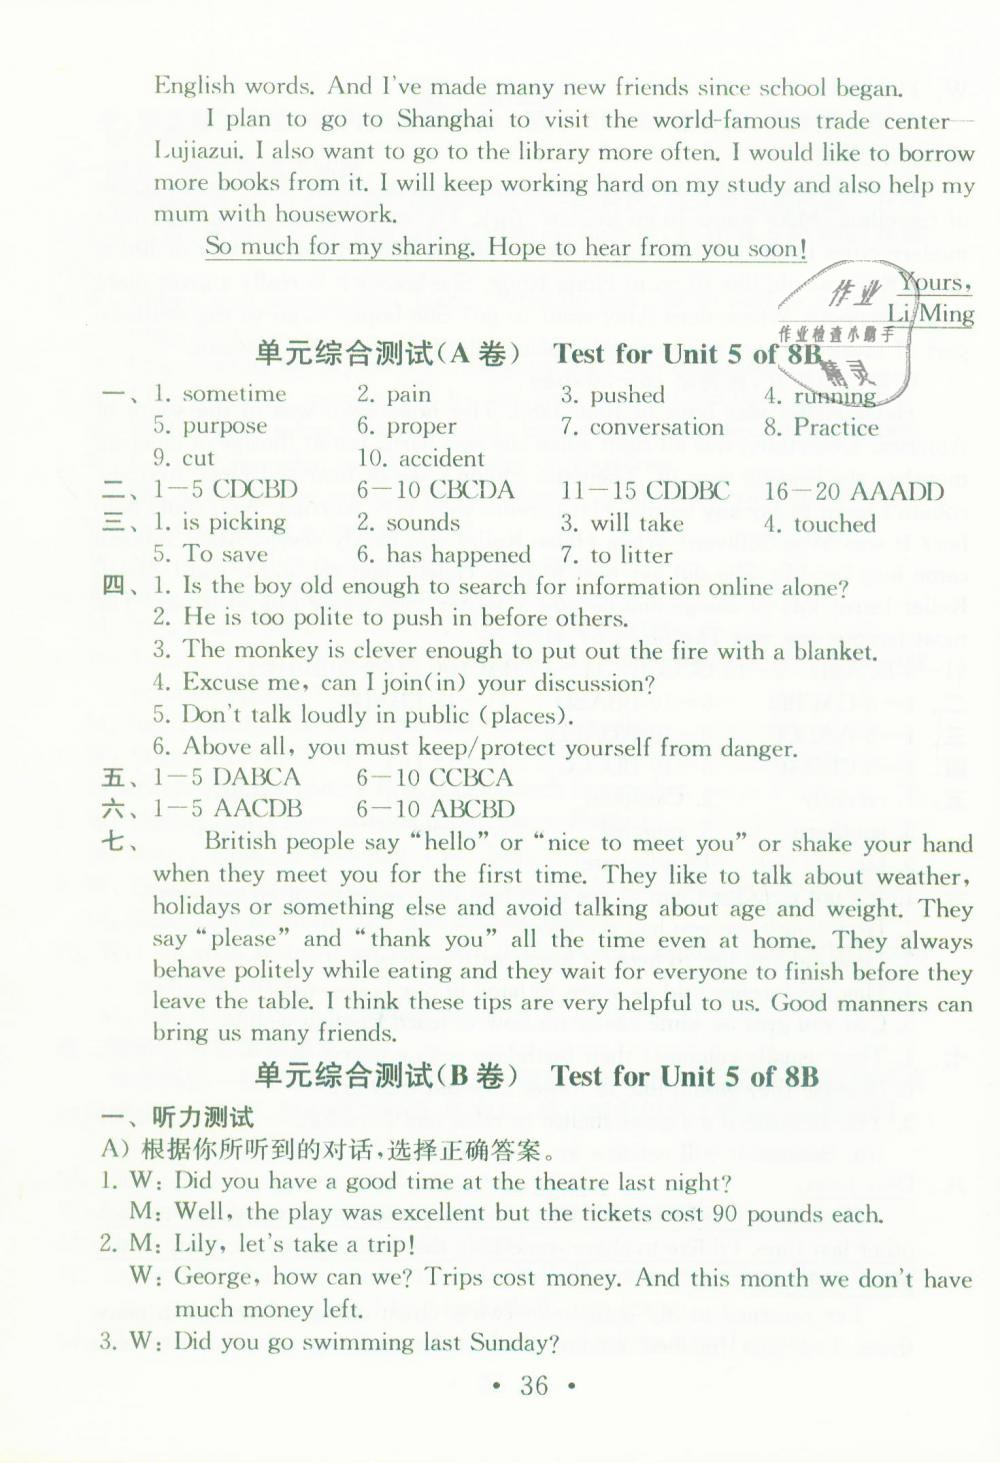 Test for Unit 5 of 8B B卷 - 第34页